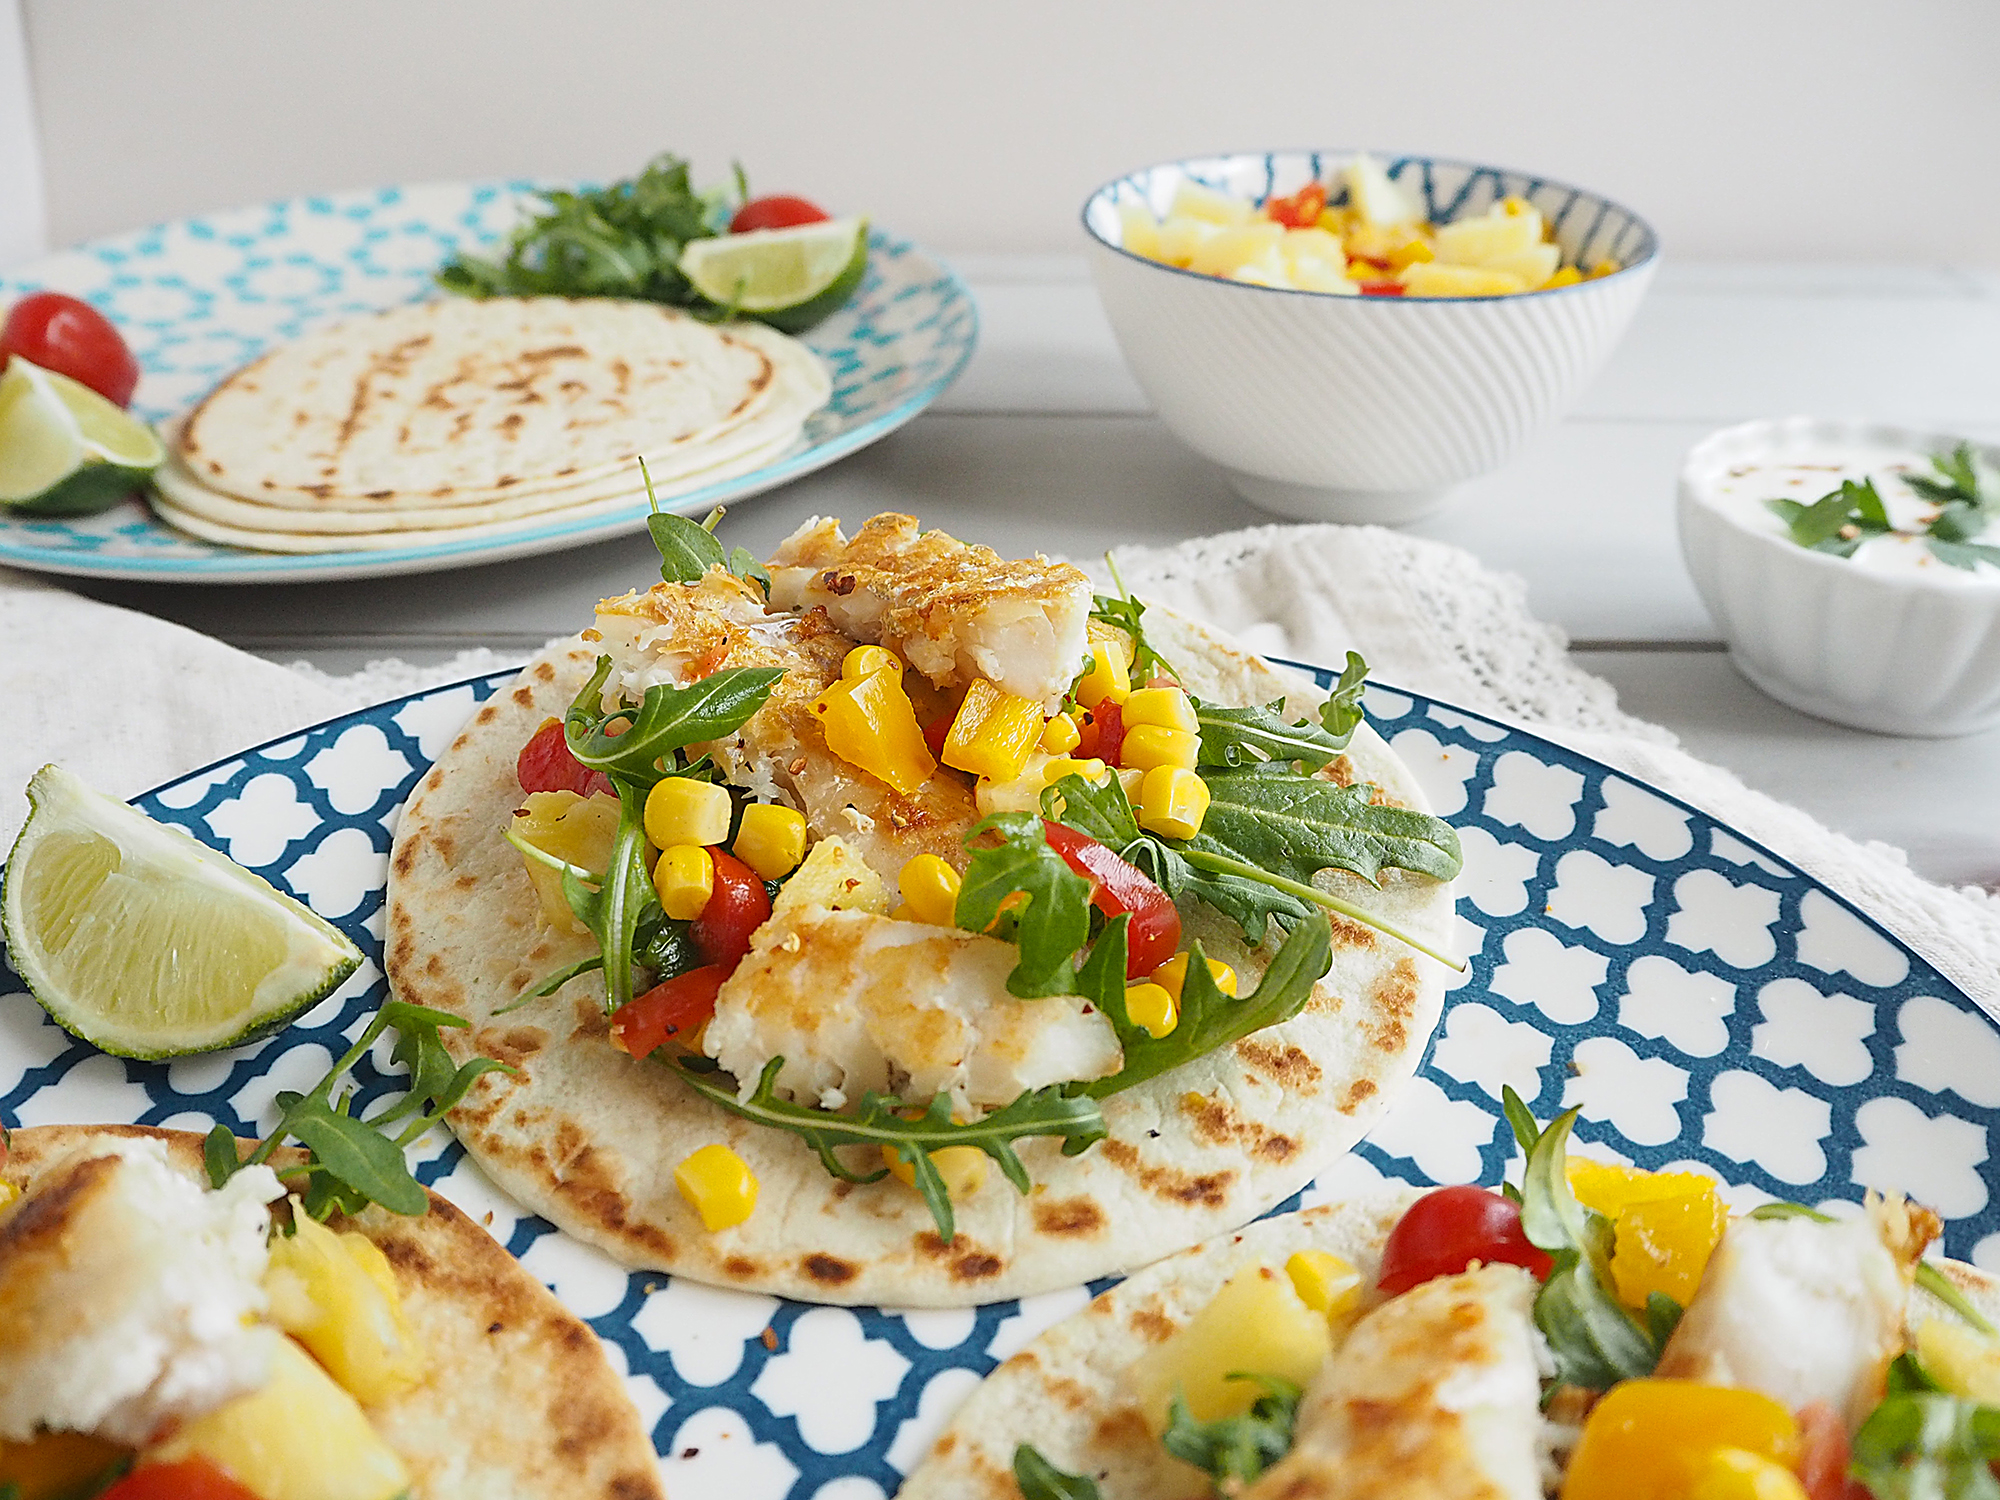 A plate with Fish Tacos with Pineapple Salsa on it, next to more plates containing tortillas, more salsa and yoghurt.